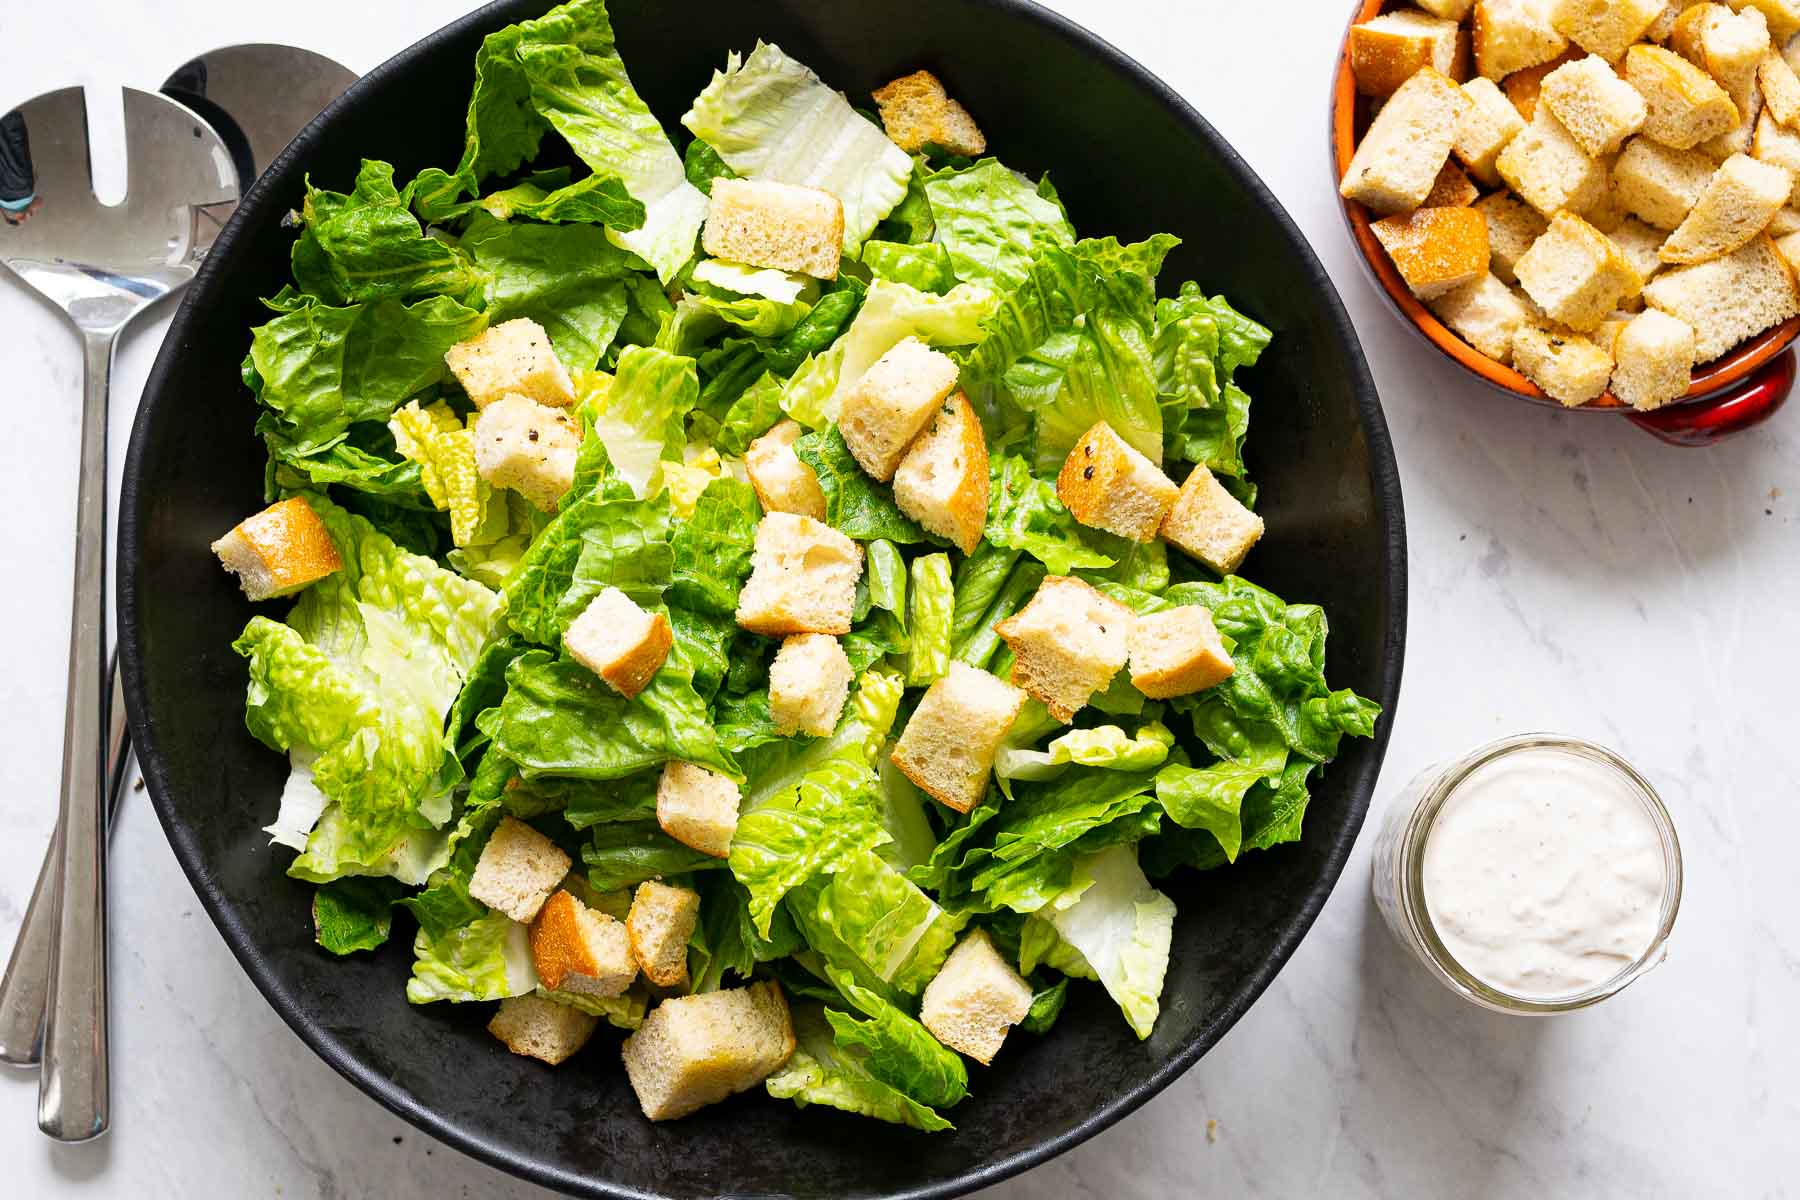 Romaine lettuce in bowl with croutons; metal spoons, caesar dressing in a jar, croutons in a bowl and on the counter.